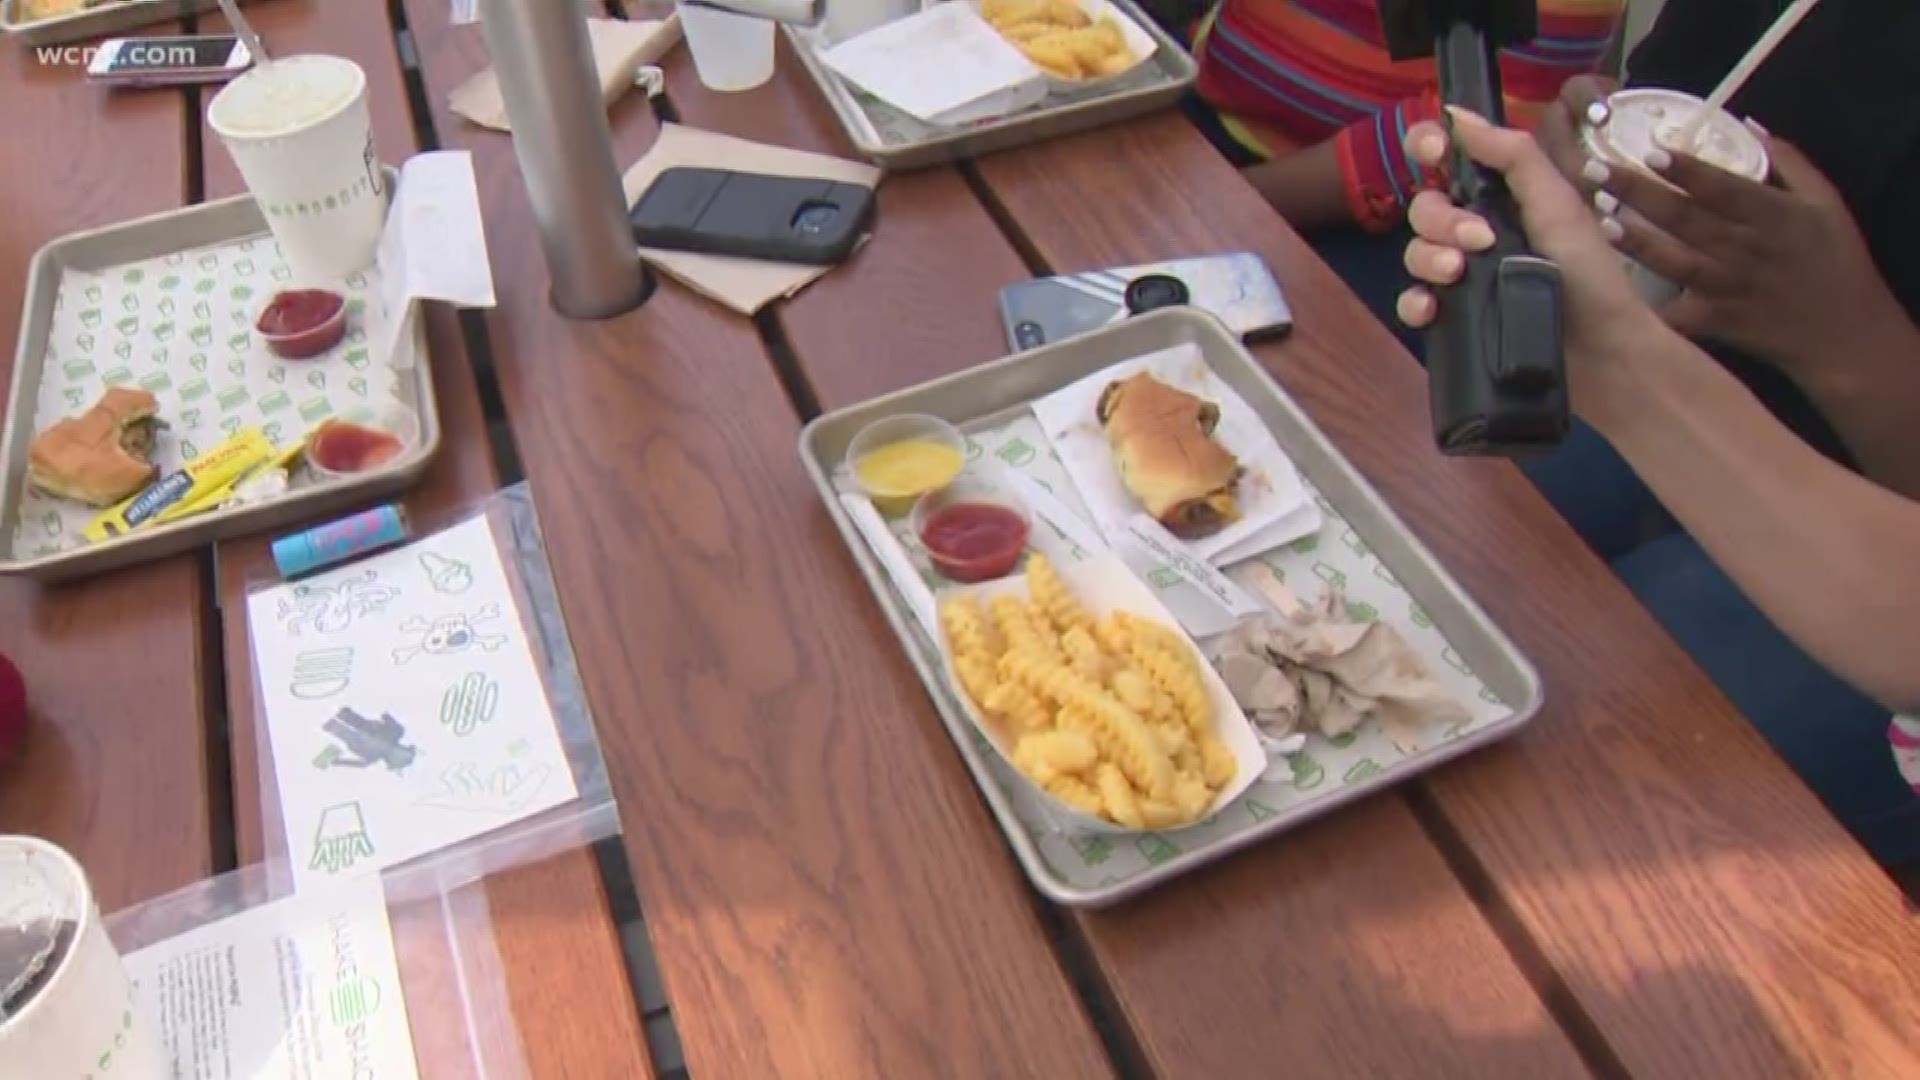 After months of anticipation, Charlotte's first Shake Shack opened its doors Thursday.